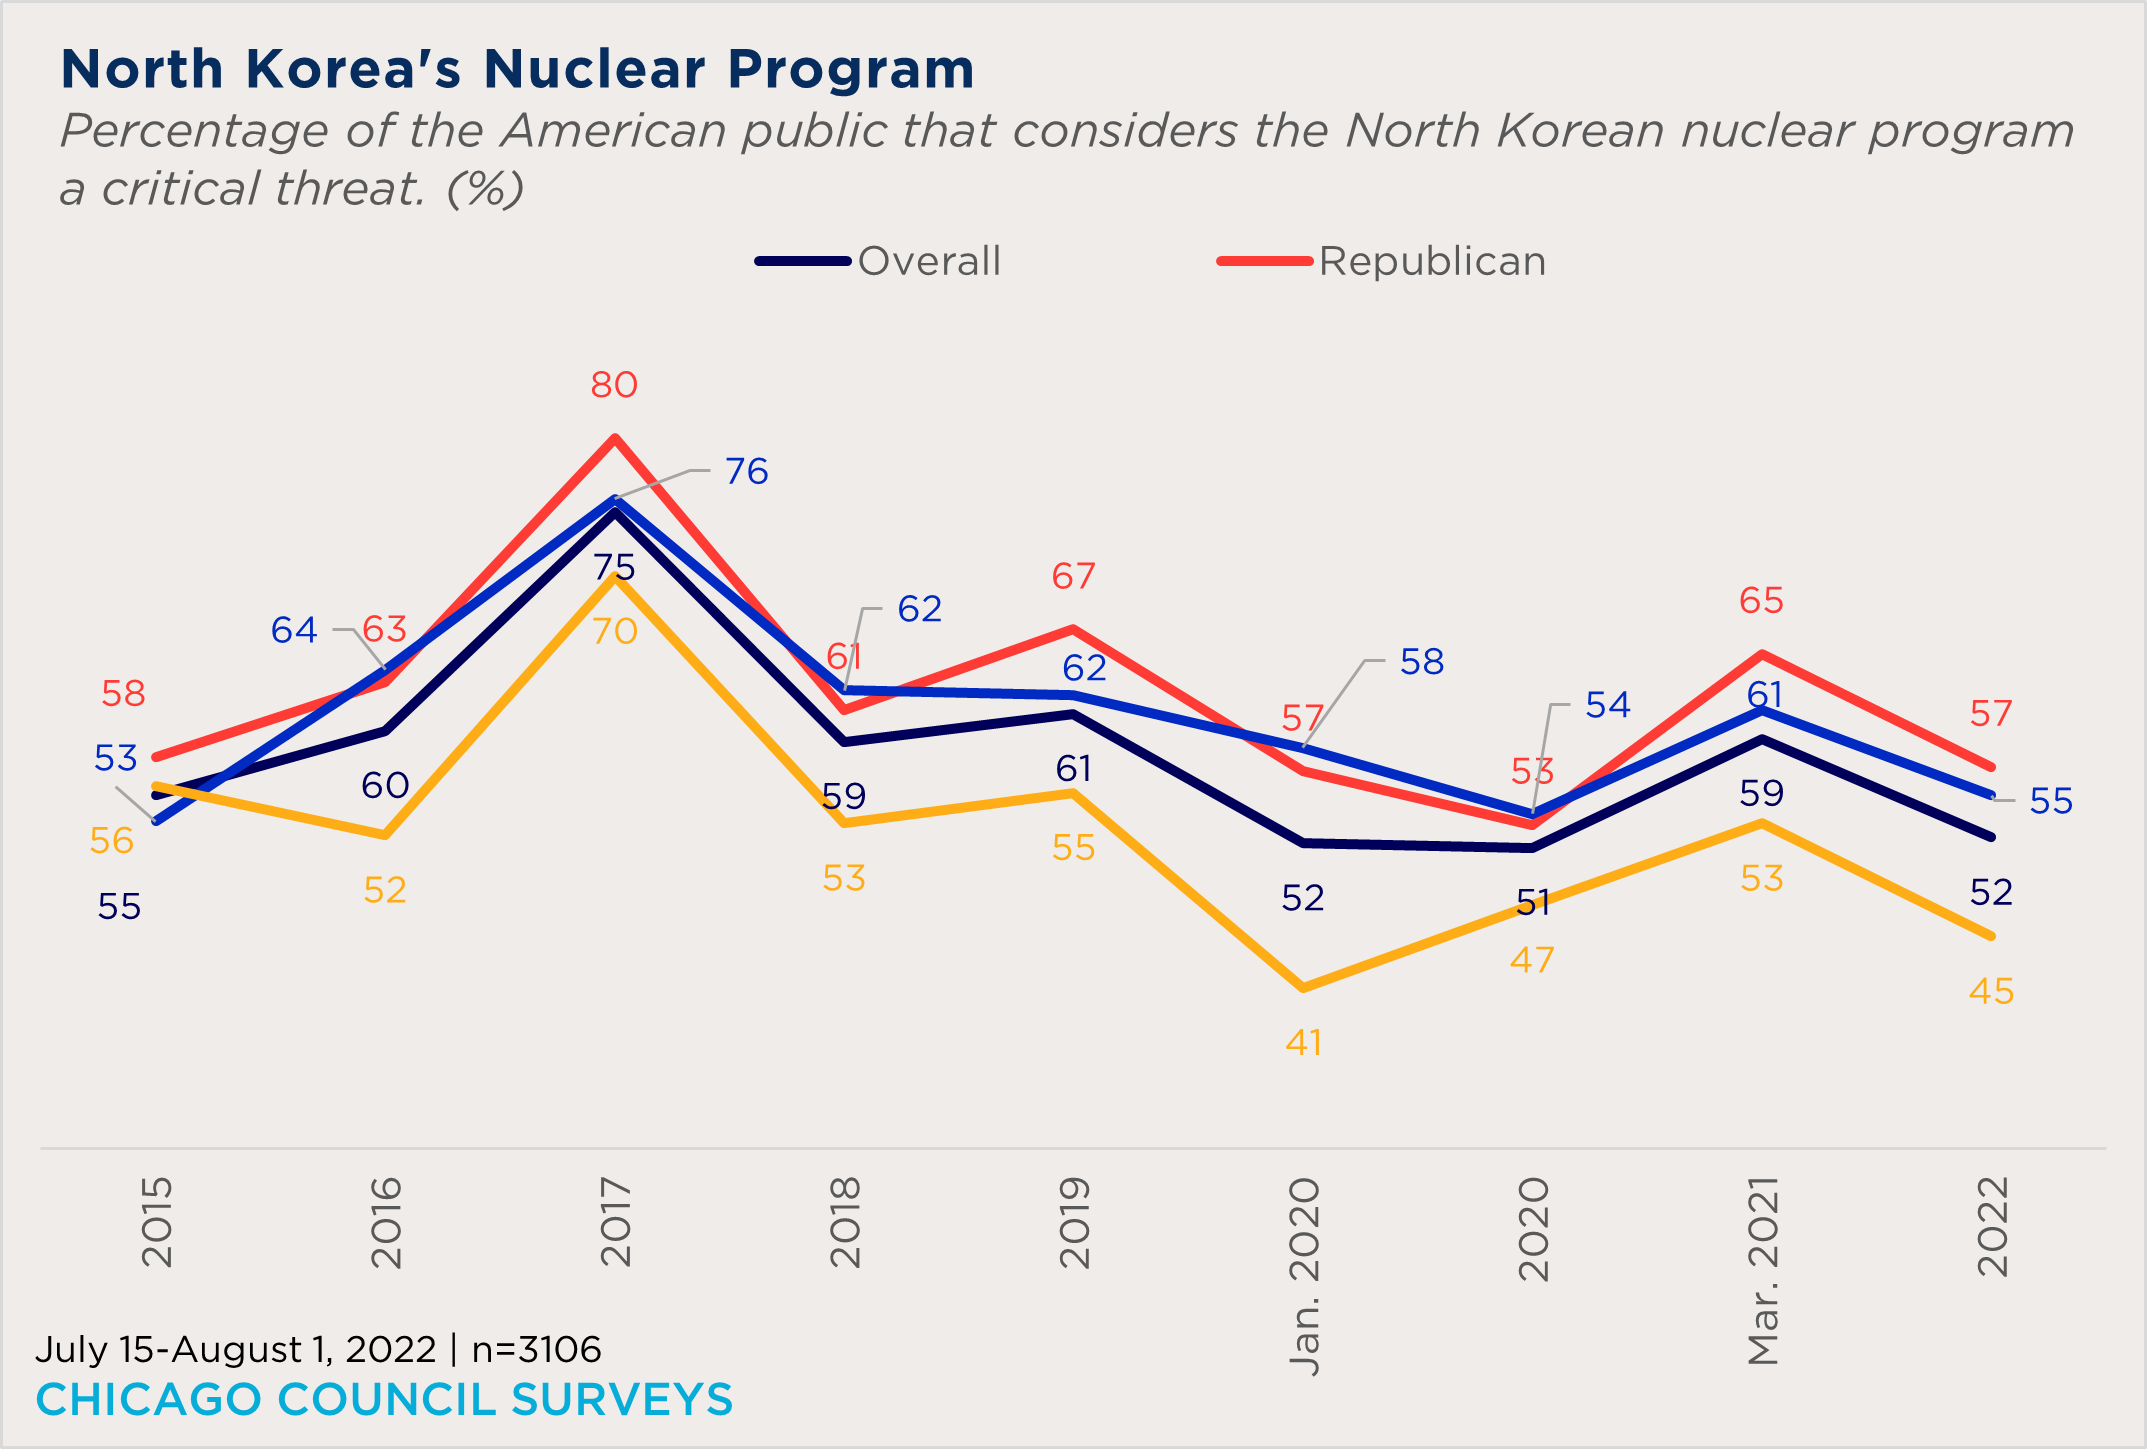 "a line chart showing partisan views of North Korea's nuclear program as a critical threat over time"